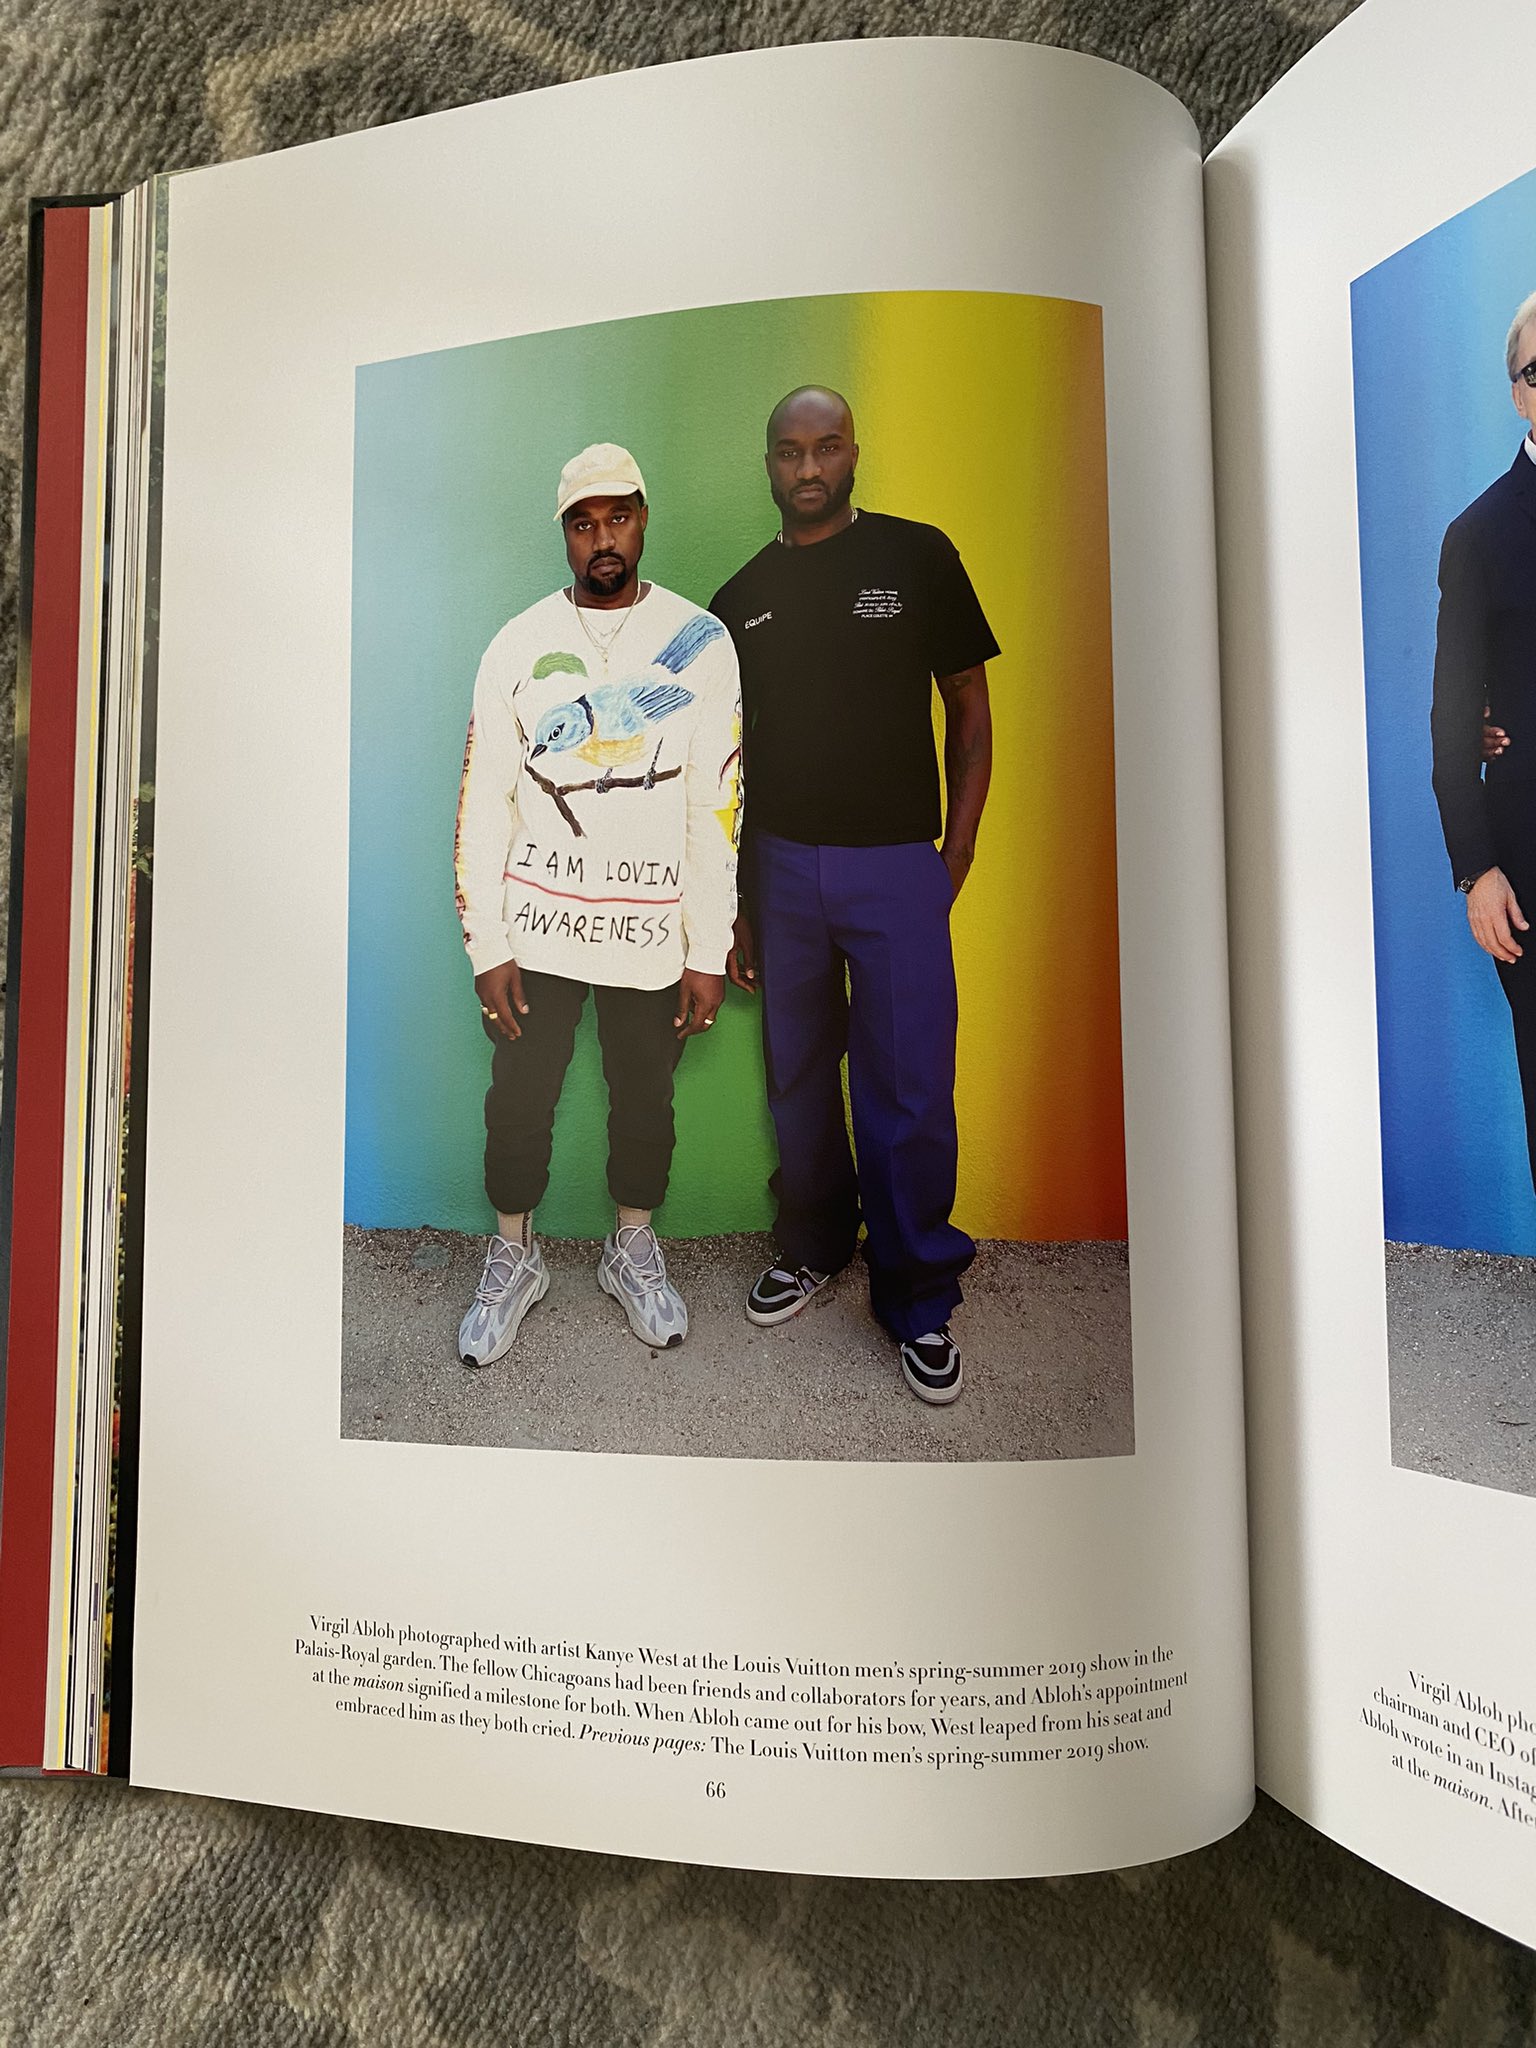 Photos Of Ye on X: This photo of Ye with Virgil and a quote from